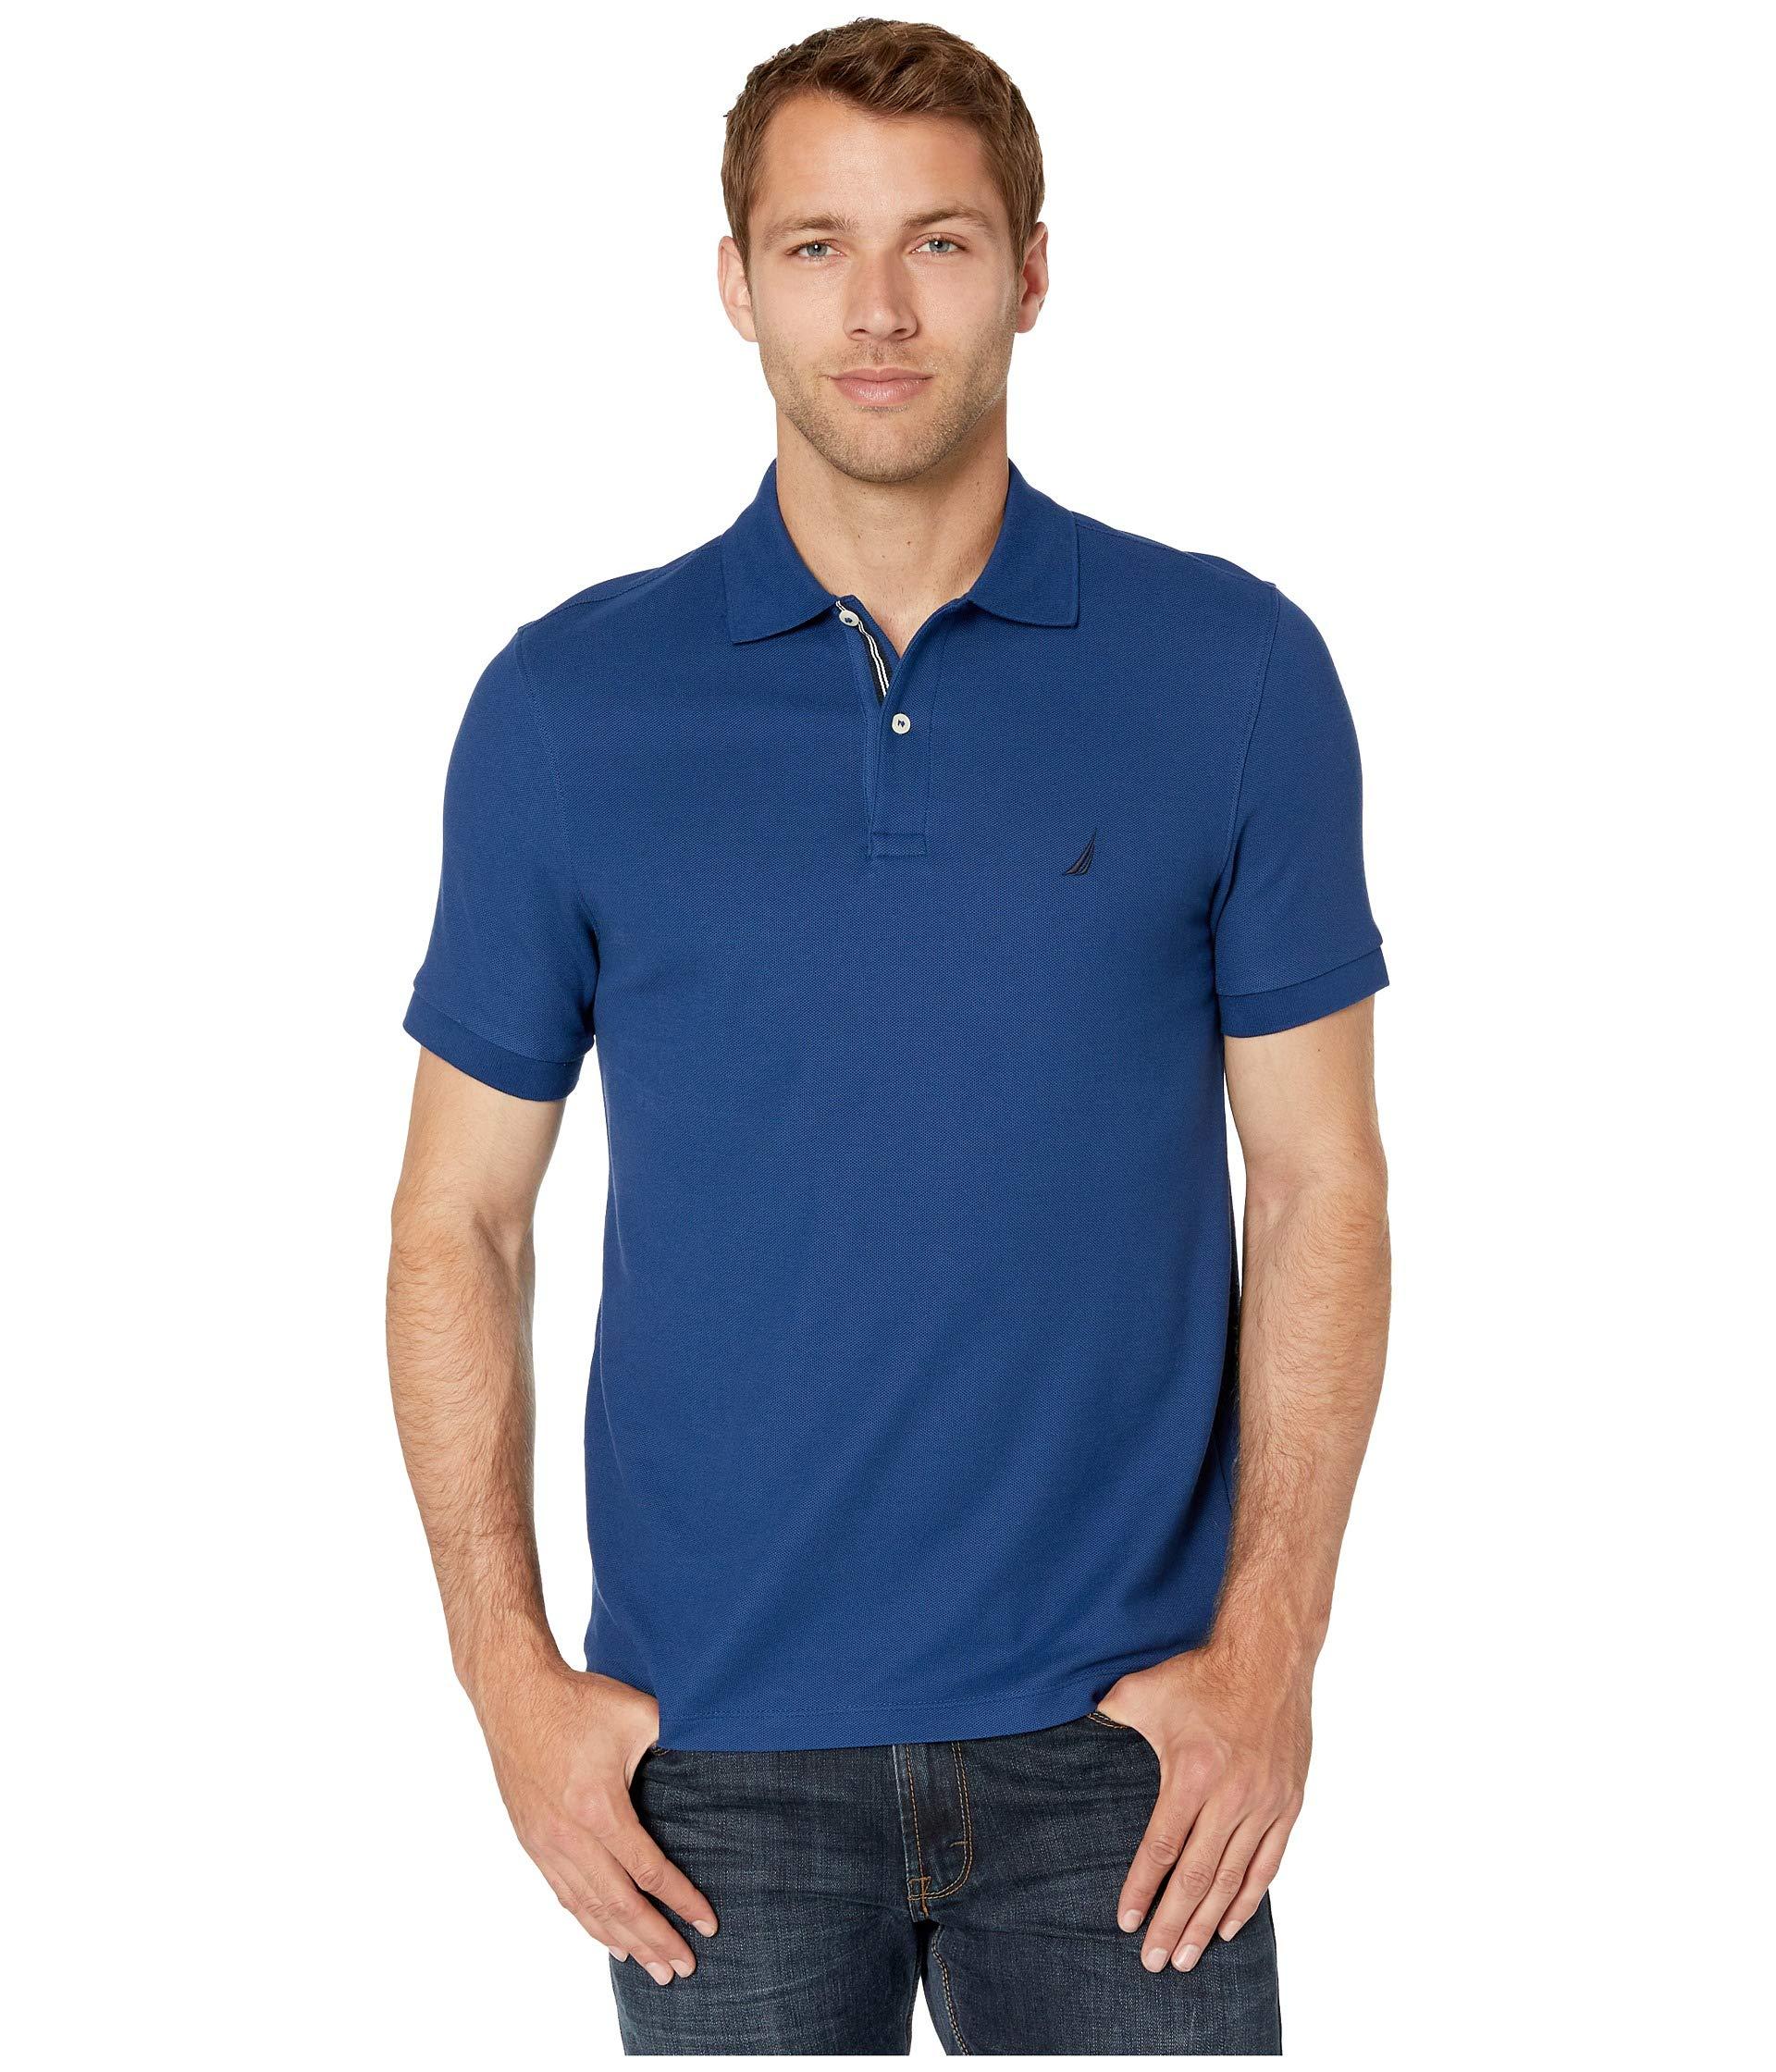 Nautica Solid Fca Deck Shirt in Blue for Men - Lyst